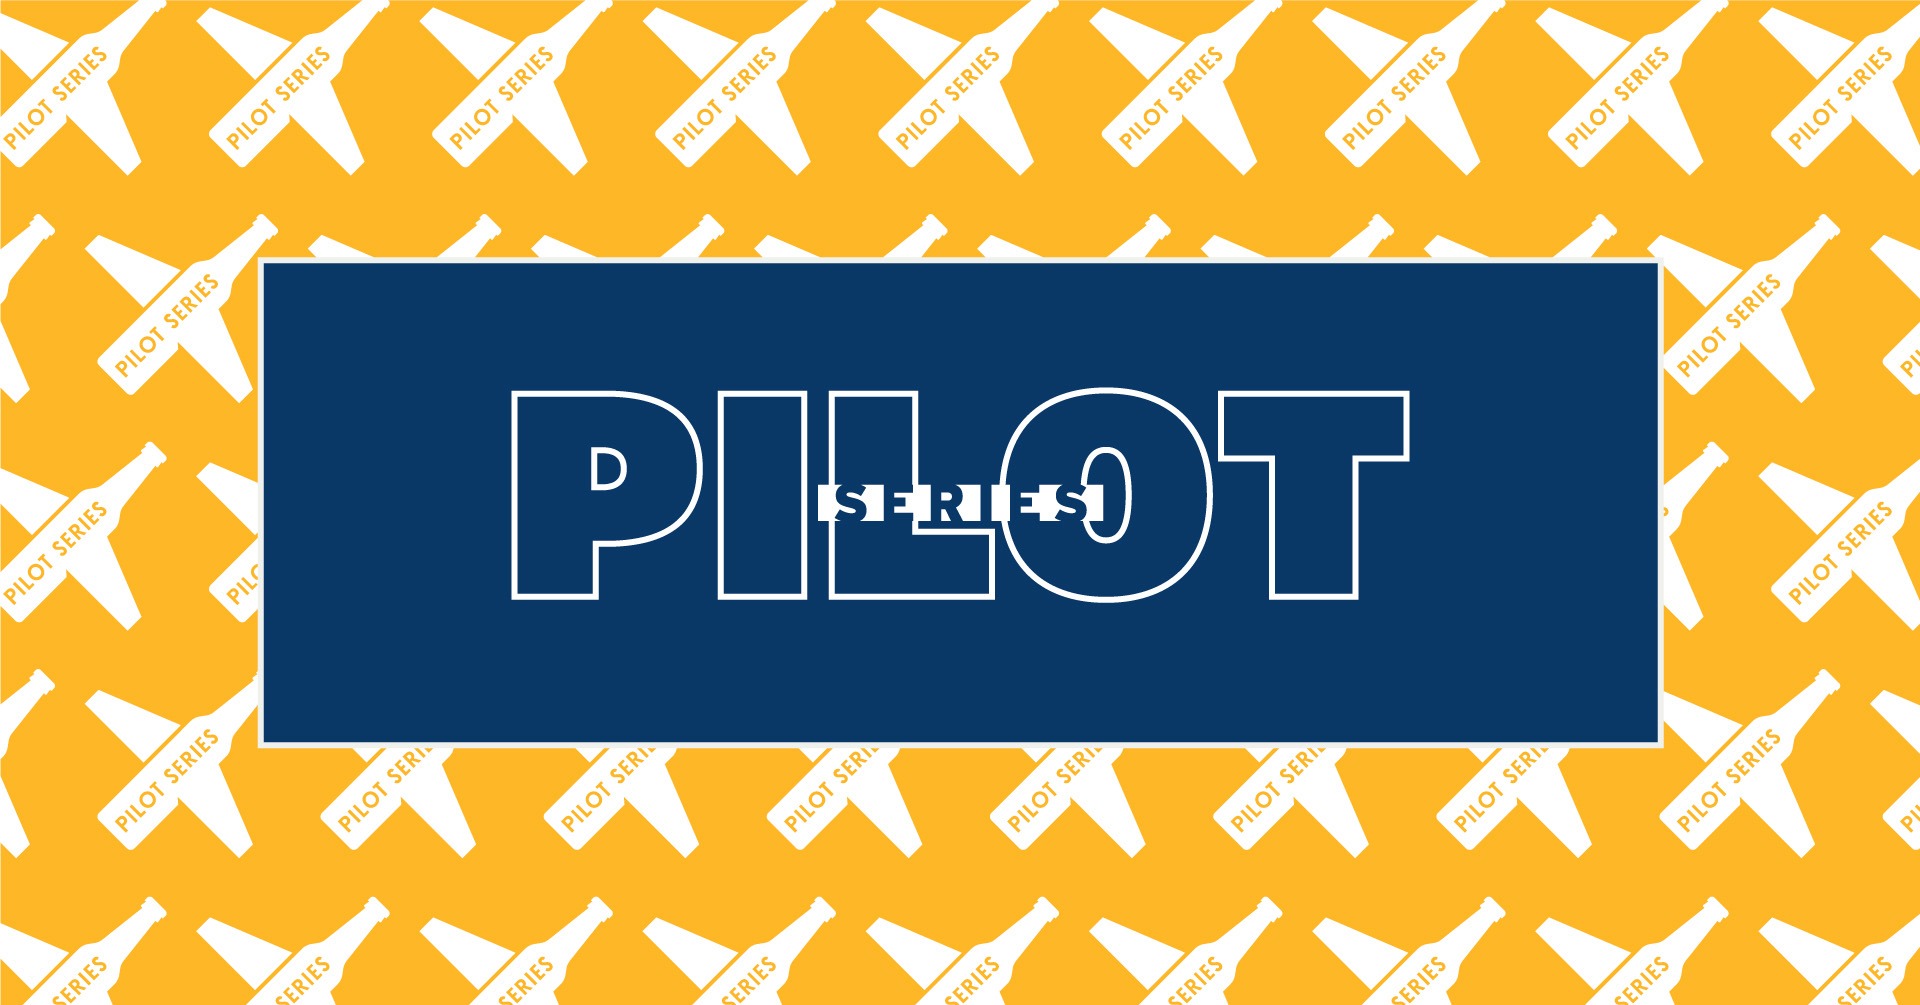 Navy rectangle with the words "PILOT SERIES" within it. The navy rectangle sits on top of a yellow rectangle with a pattern of beer bottles that look like airplanes.